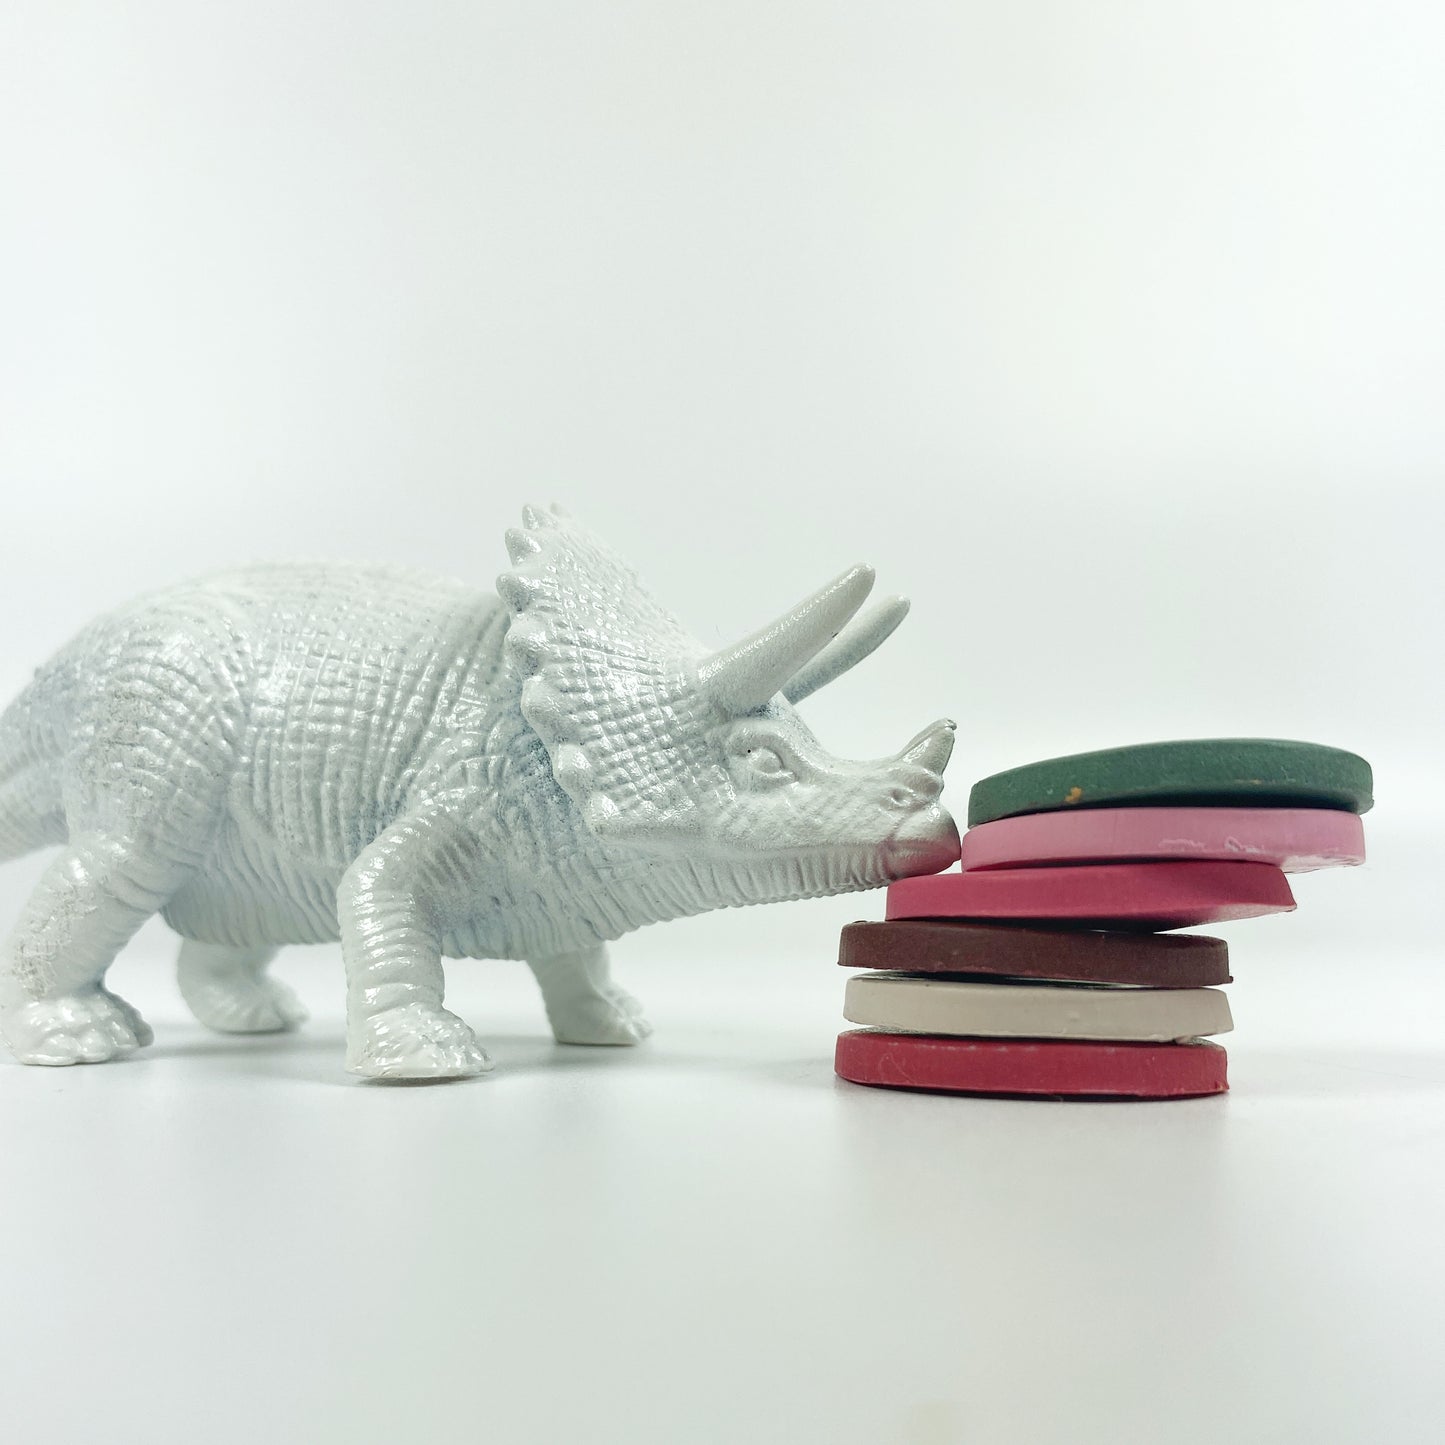 A stack of 6 polymer clay color sample discs with a white dinosaur trying to knock them over